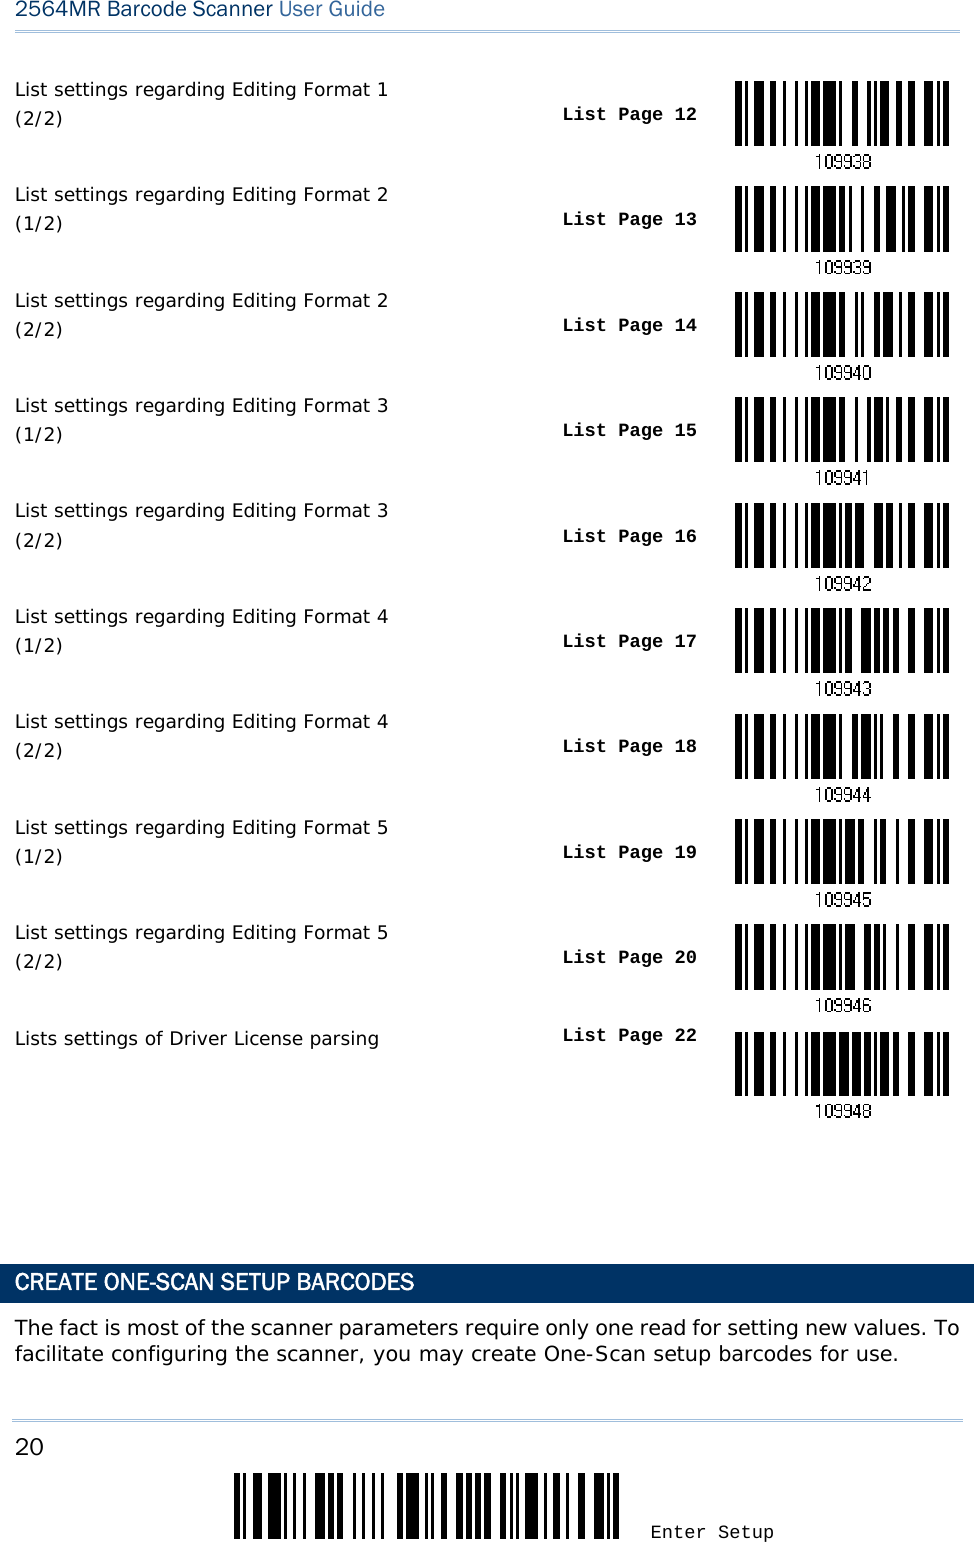 20 Enter Setup 2564MR Barcode Scanner User Guide  List settings regarding Editing Format 1  (2/2)  List Page 12List settings regarding Editing Format 2  (1/2)  List Page 13List settings regarding Editing Format 2  (2/2)  List Page 14List settings regarding Editing Format 3 (1/2)  List Page 15List settings regarding Editing Format 3 (2/2)  List Page 16List settings regarding Editing Format 4  (1/2)  List Page 17List settings regarding Editing Format 4  (2/2)  List Page 18List settings regarding Editing Format 5 (1/2)  List Page 19List settings regarding Editing Format 5 (2/2)  List Page 20Lists settings of Driver License parsing  List Page 22   CREATE ONE-SCAN SETUP BARCODES The fact is most of the scanner parameters require only one read for setting new values. To facilitate configuring the scanner, you may create One-Scan setup barcodes for use. 